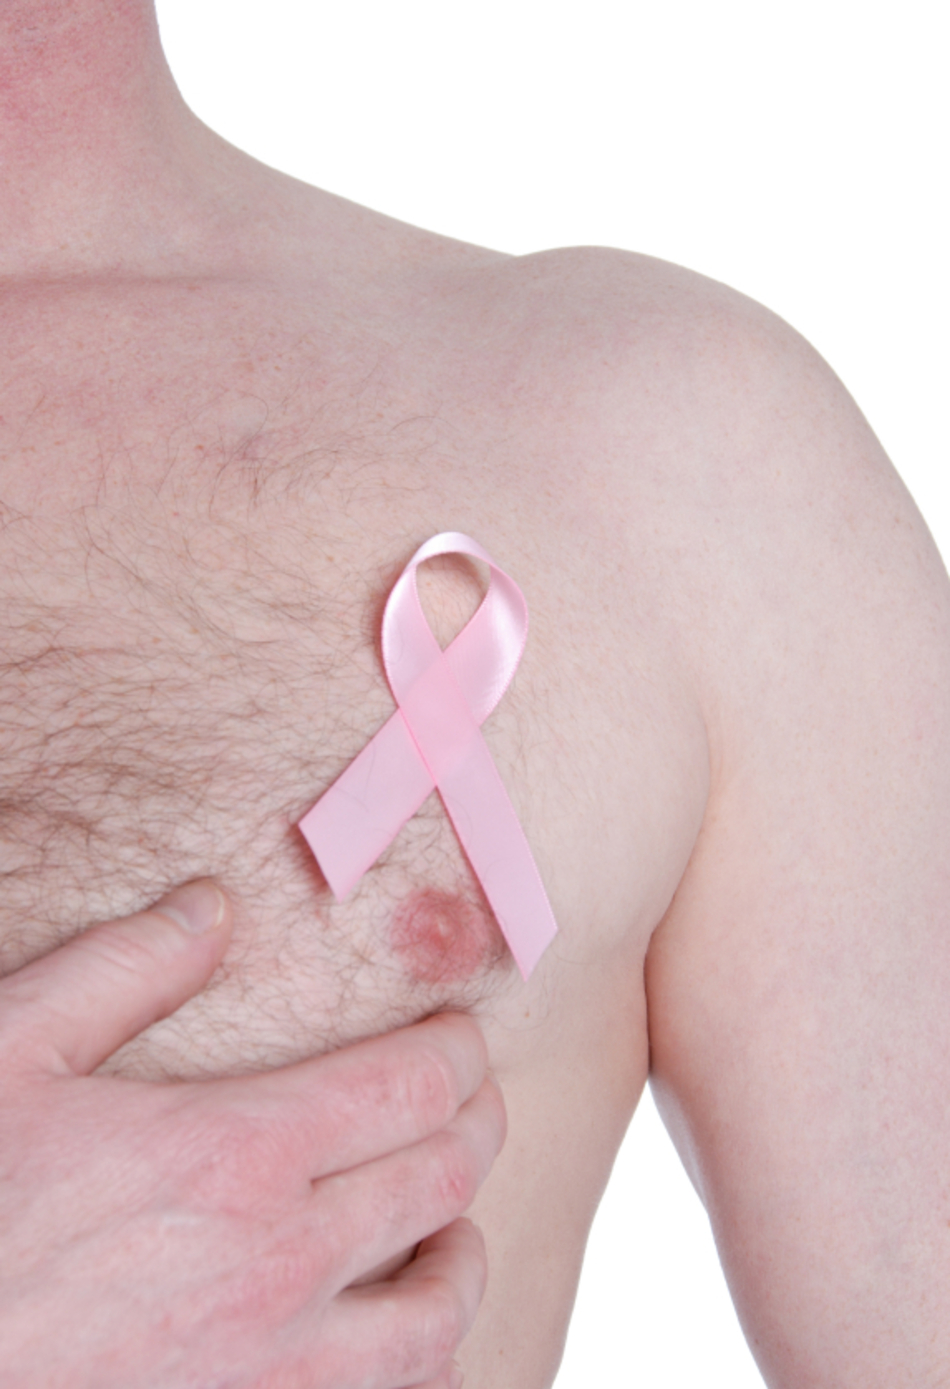 Can Men Get Breast Cancer? Absolutely.